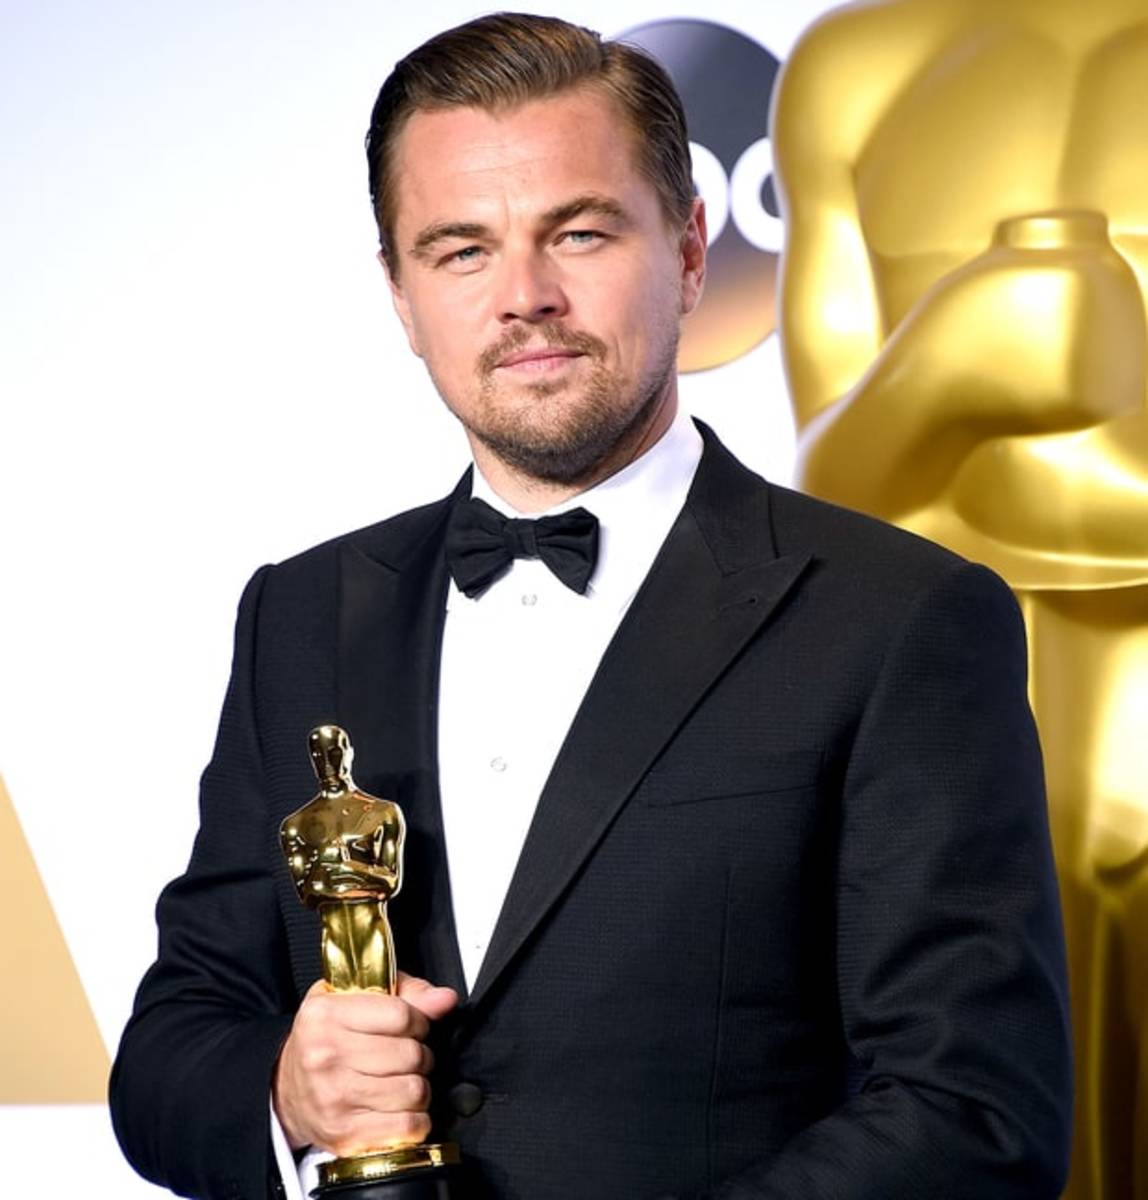 Leonardo DiCaprio at the 2016 Oscars after winning Best Actor for The Revenant.